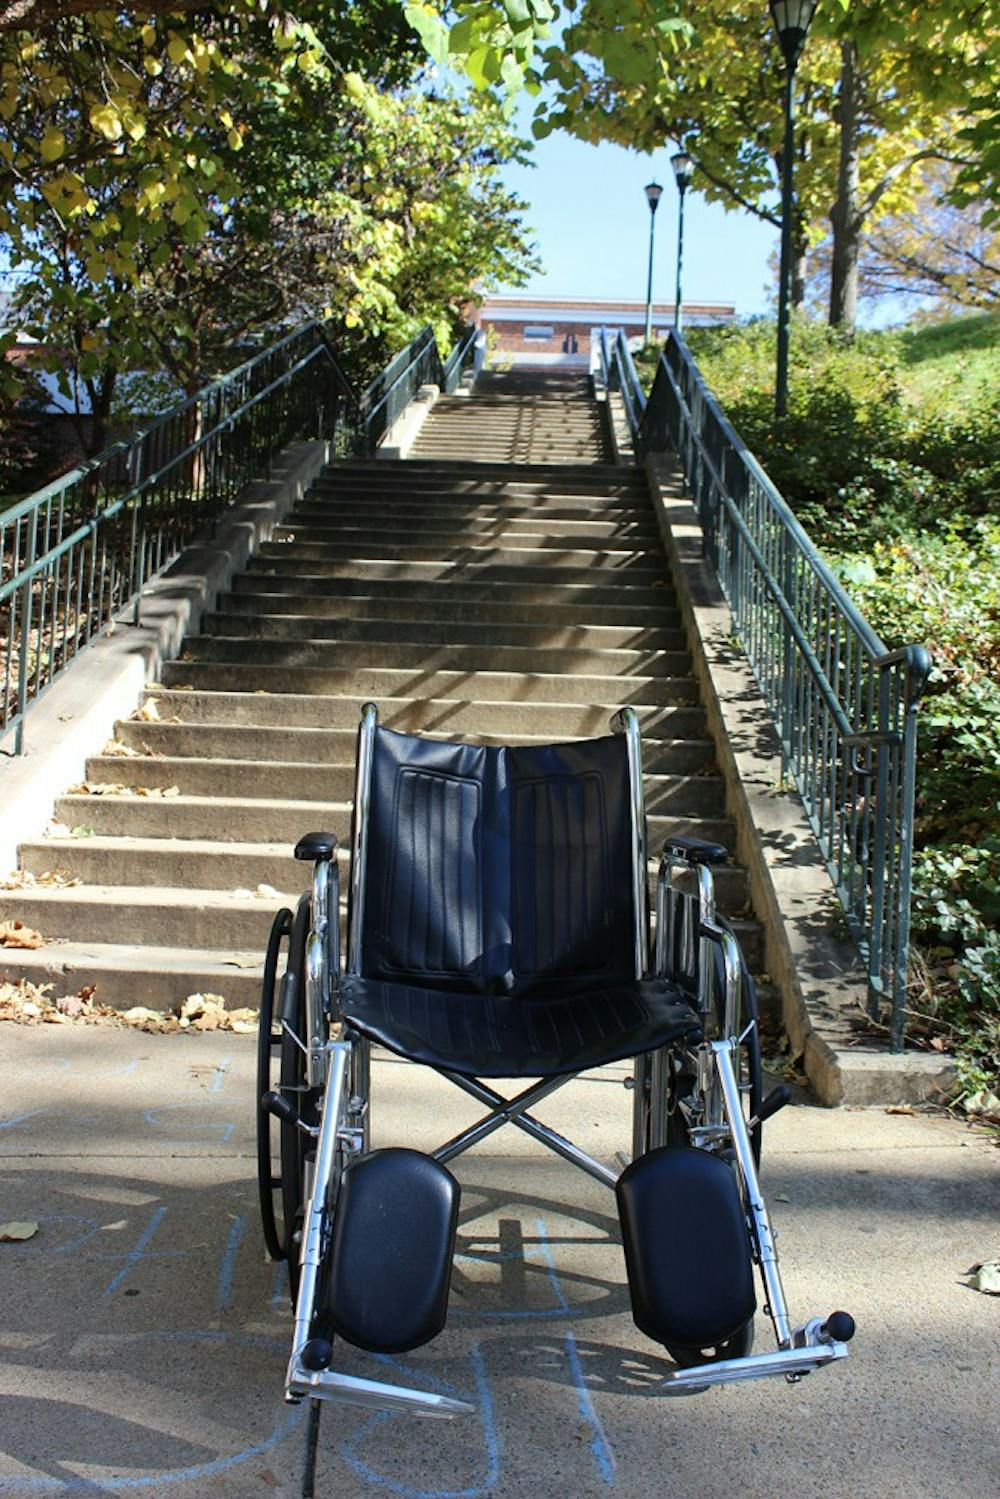 <p>A program through the Provost’s Office called “Report a Barrier” allows students and faculty to alert administration of areas which could cause trouble for those in wheelchairs or on scooters.</p>